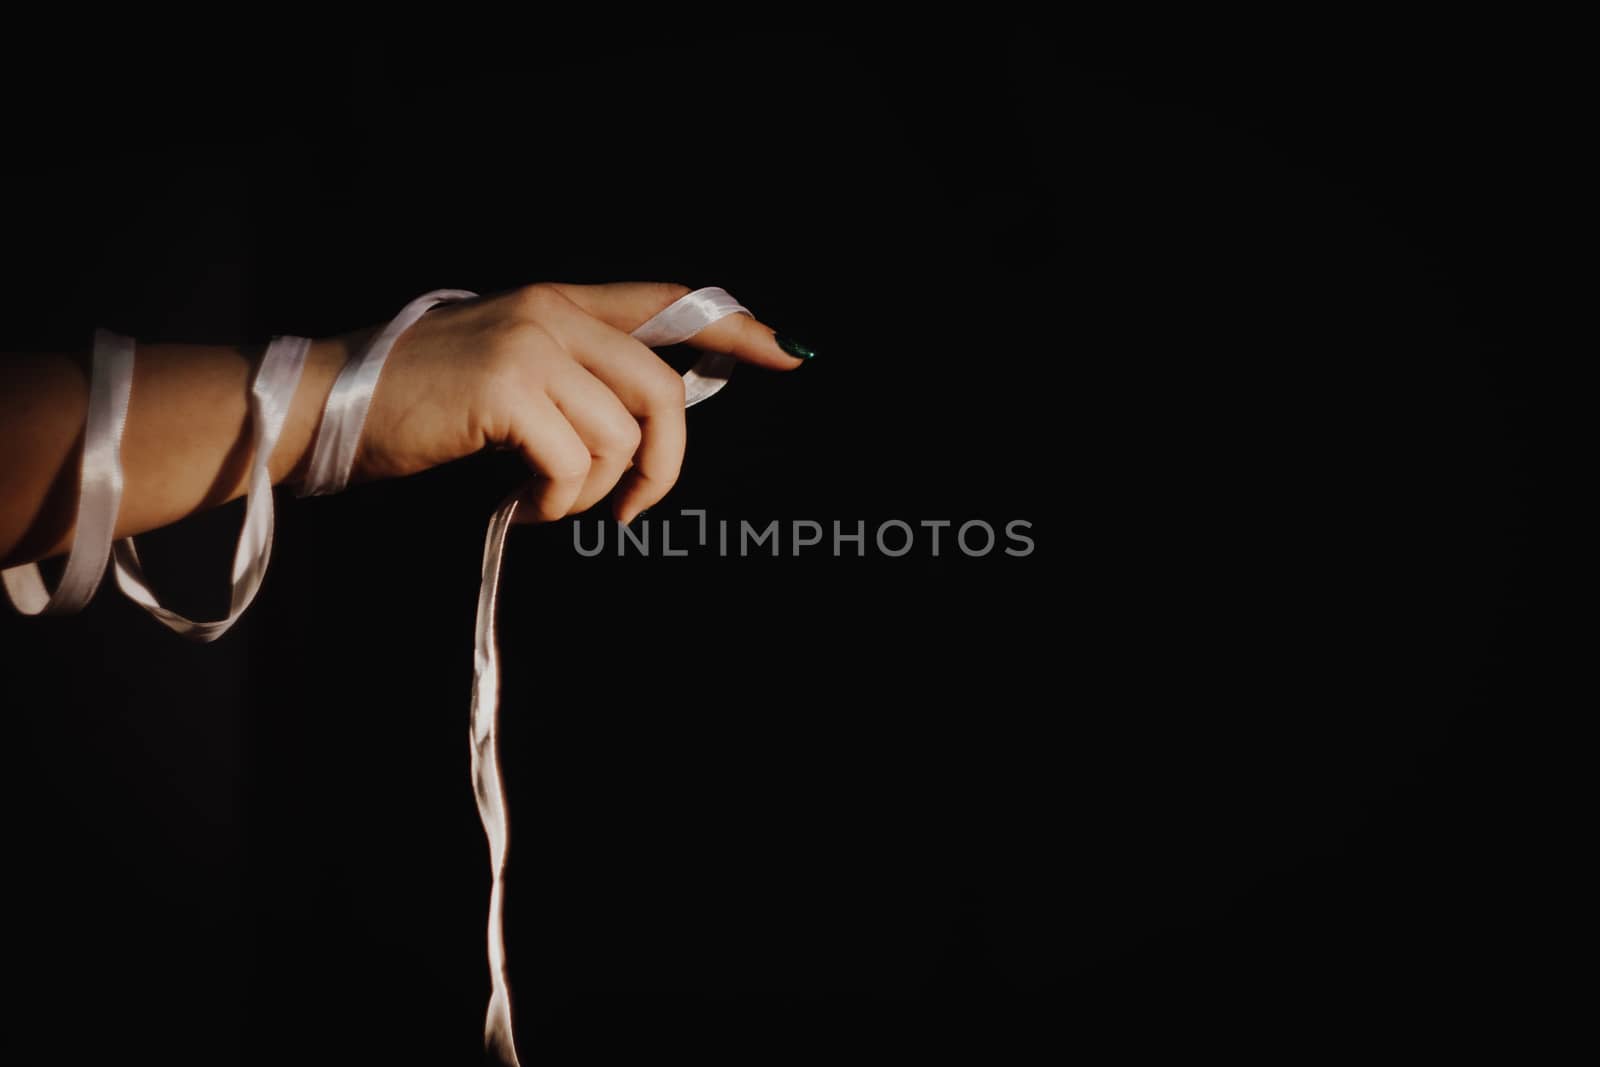 tied hands with white ribbon isolated on black background highlighted with light by yulaphotographer